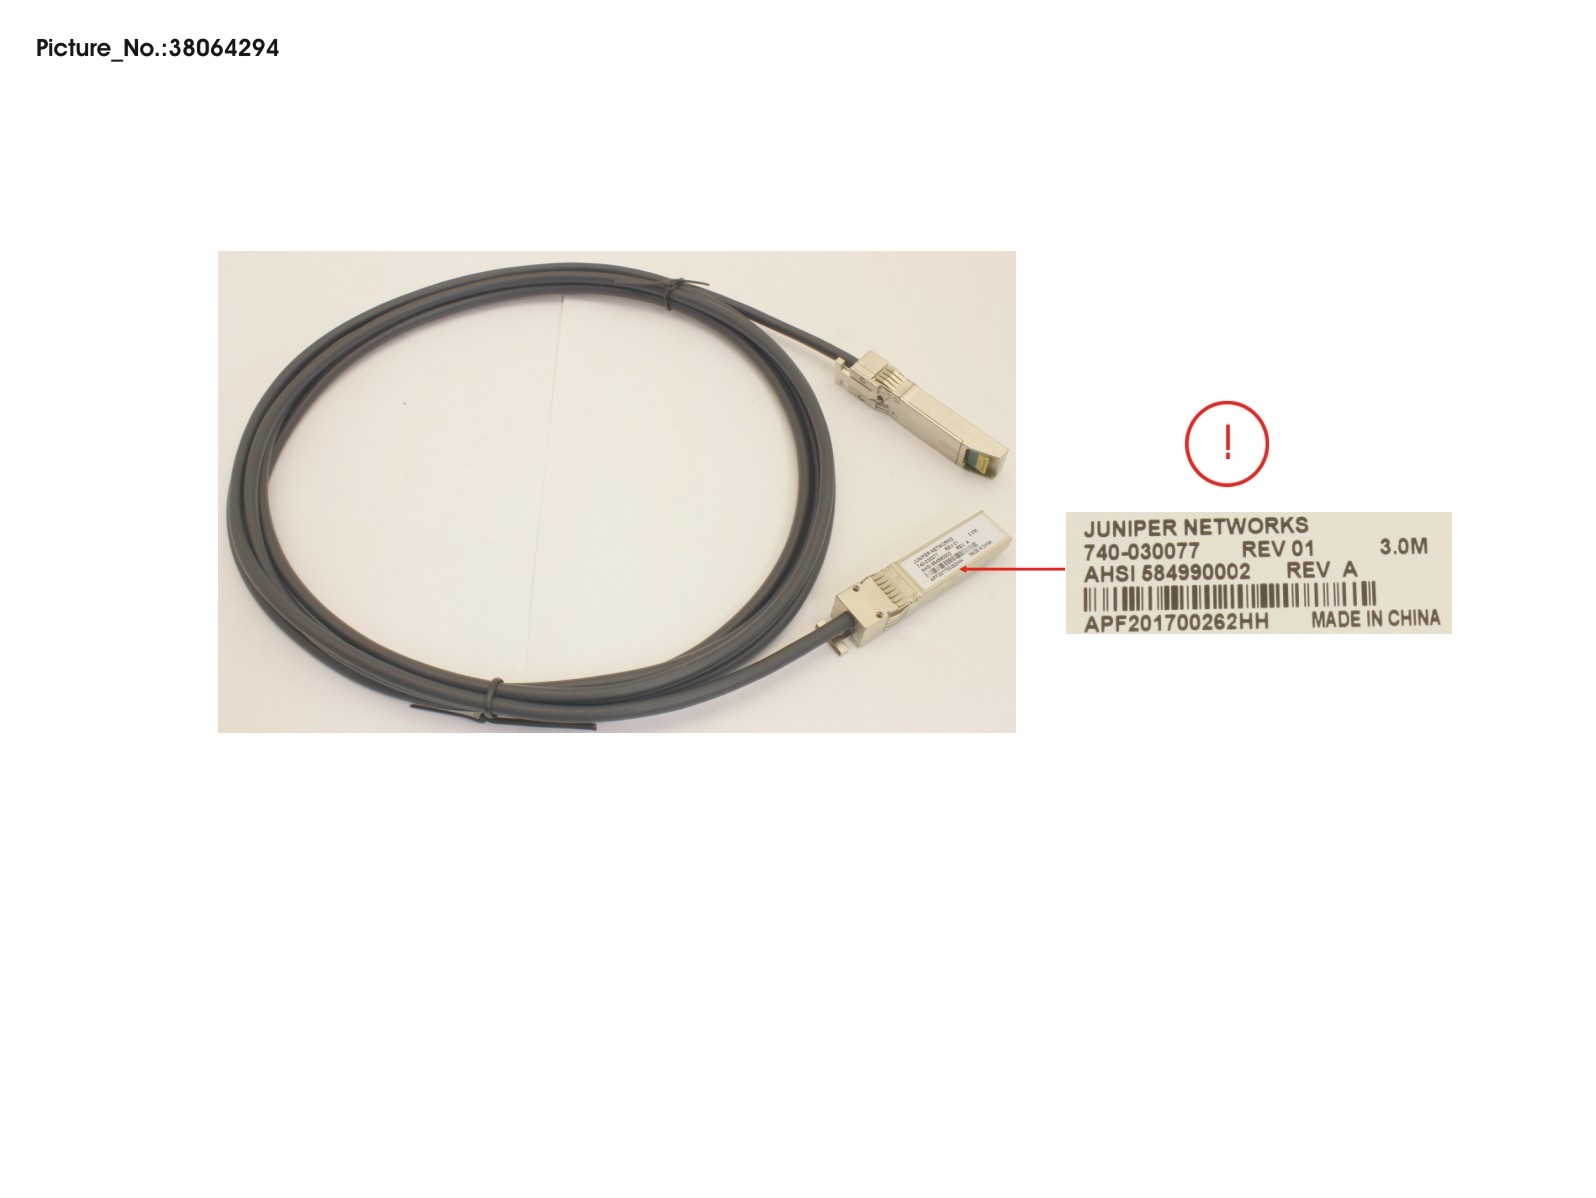 10G DIRECT ATTACHED CABLE(TWINAX 3M, 1PA